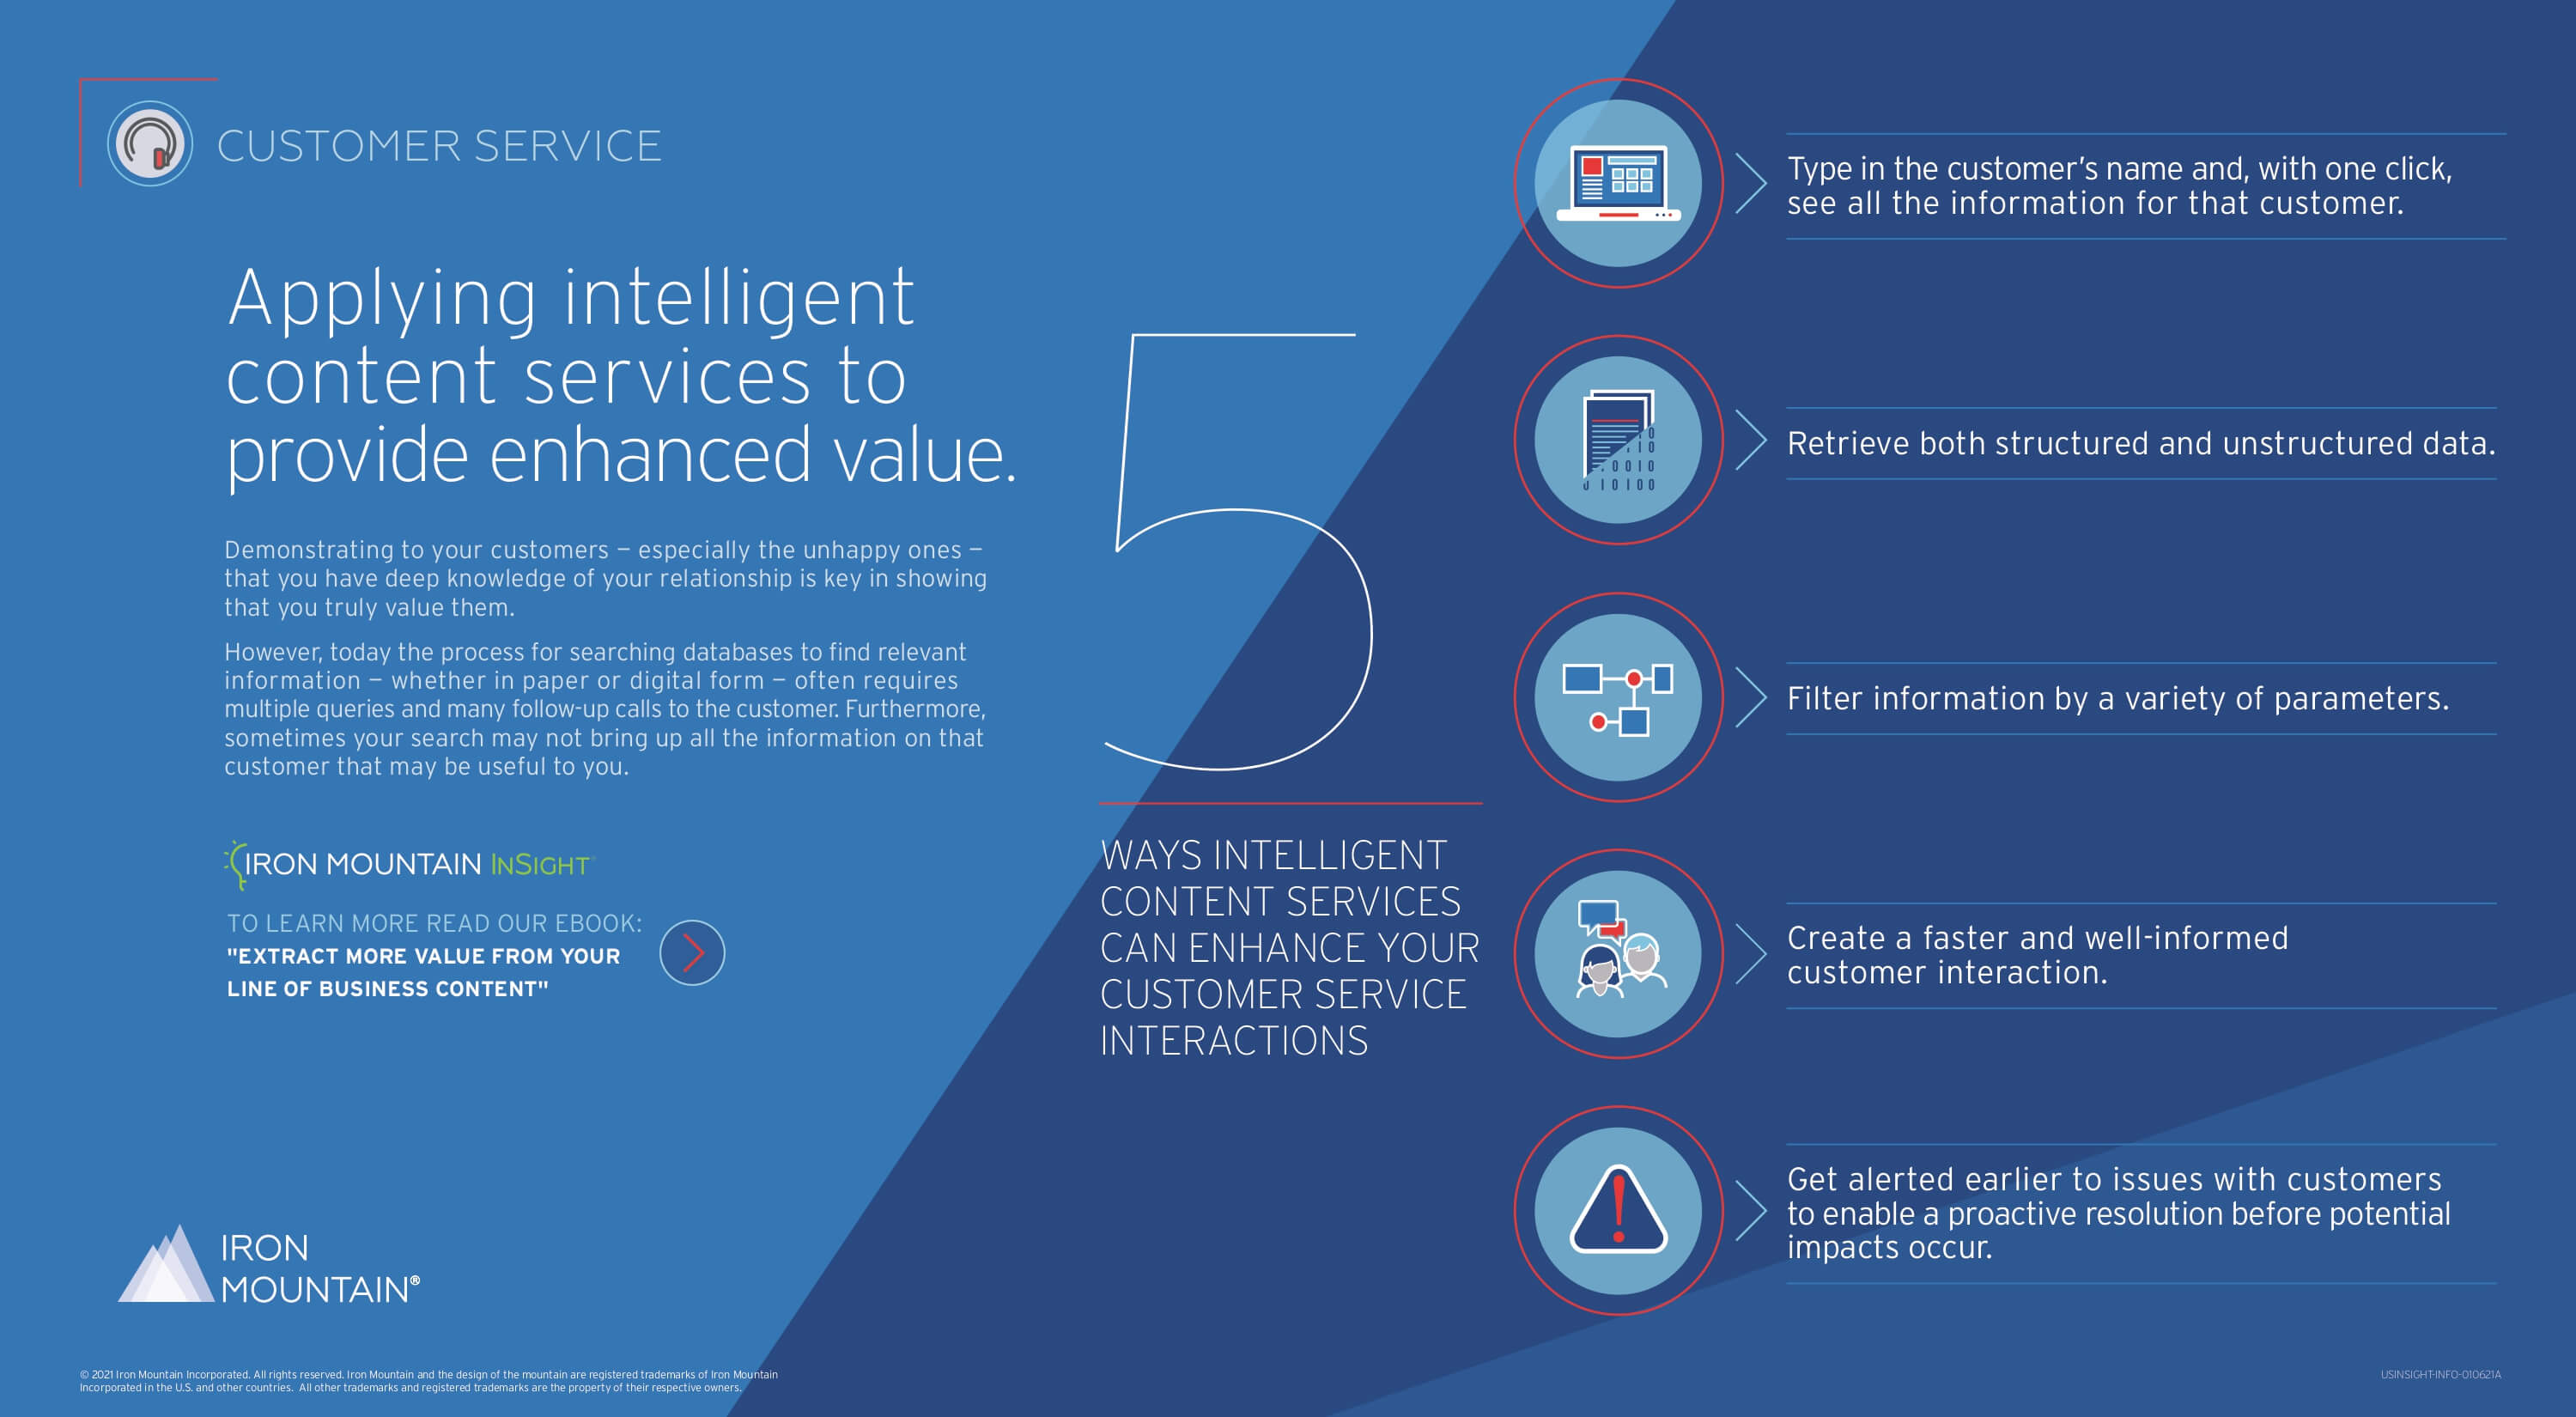 5 Ways Intelligent Content Services Can Enhance Your Customer Service Interactions